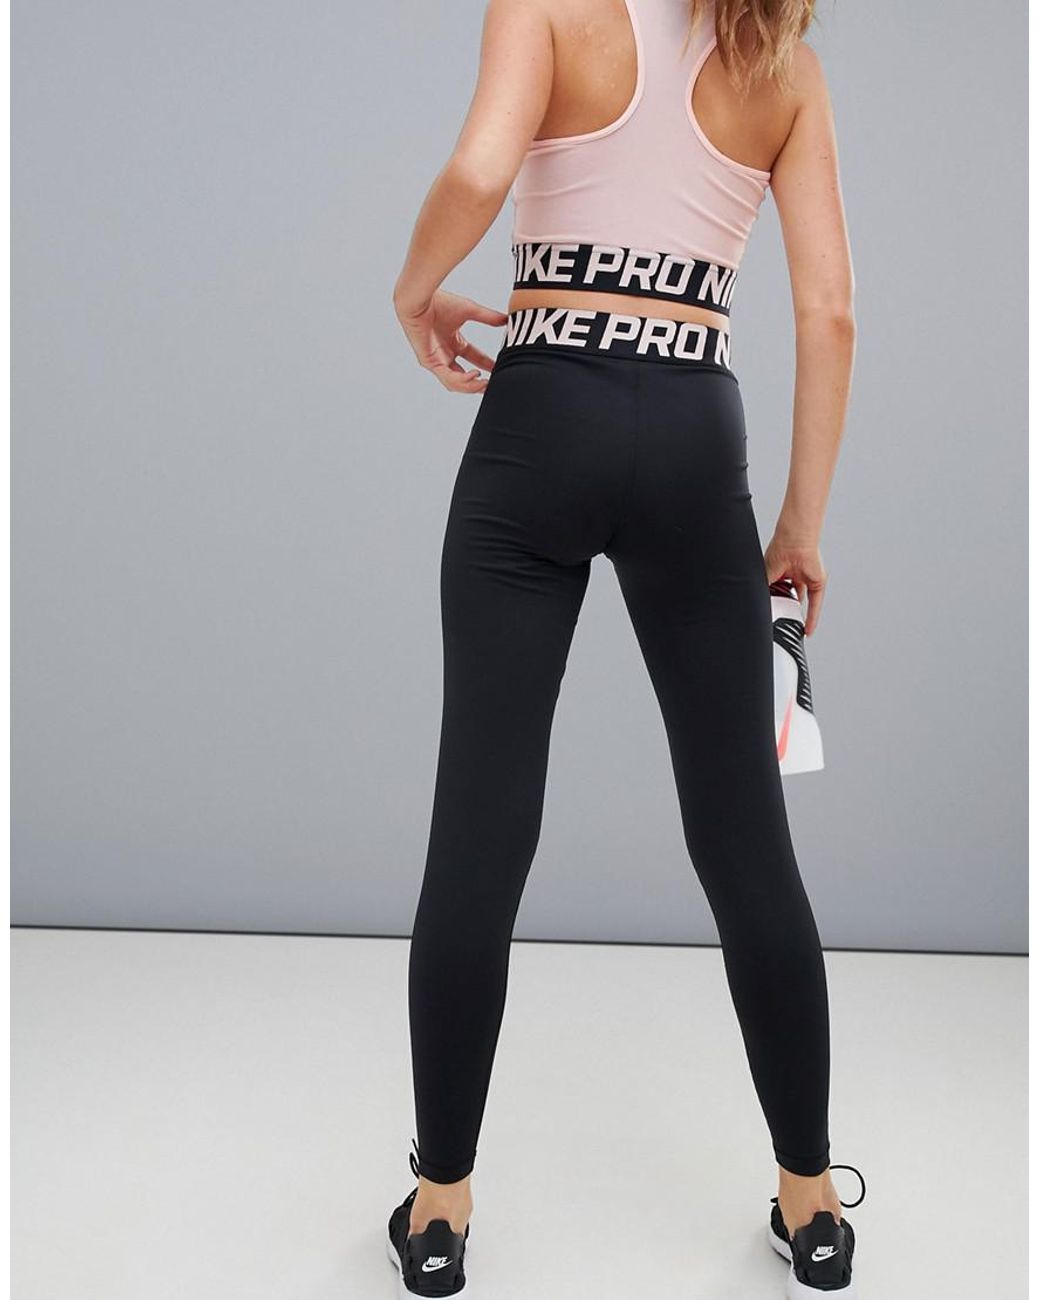 Nike Nike Pro Training Crossover Leggings In Black And Pink | Lyst UK